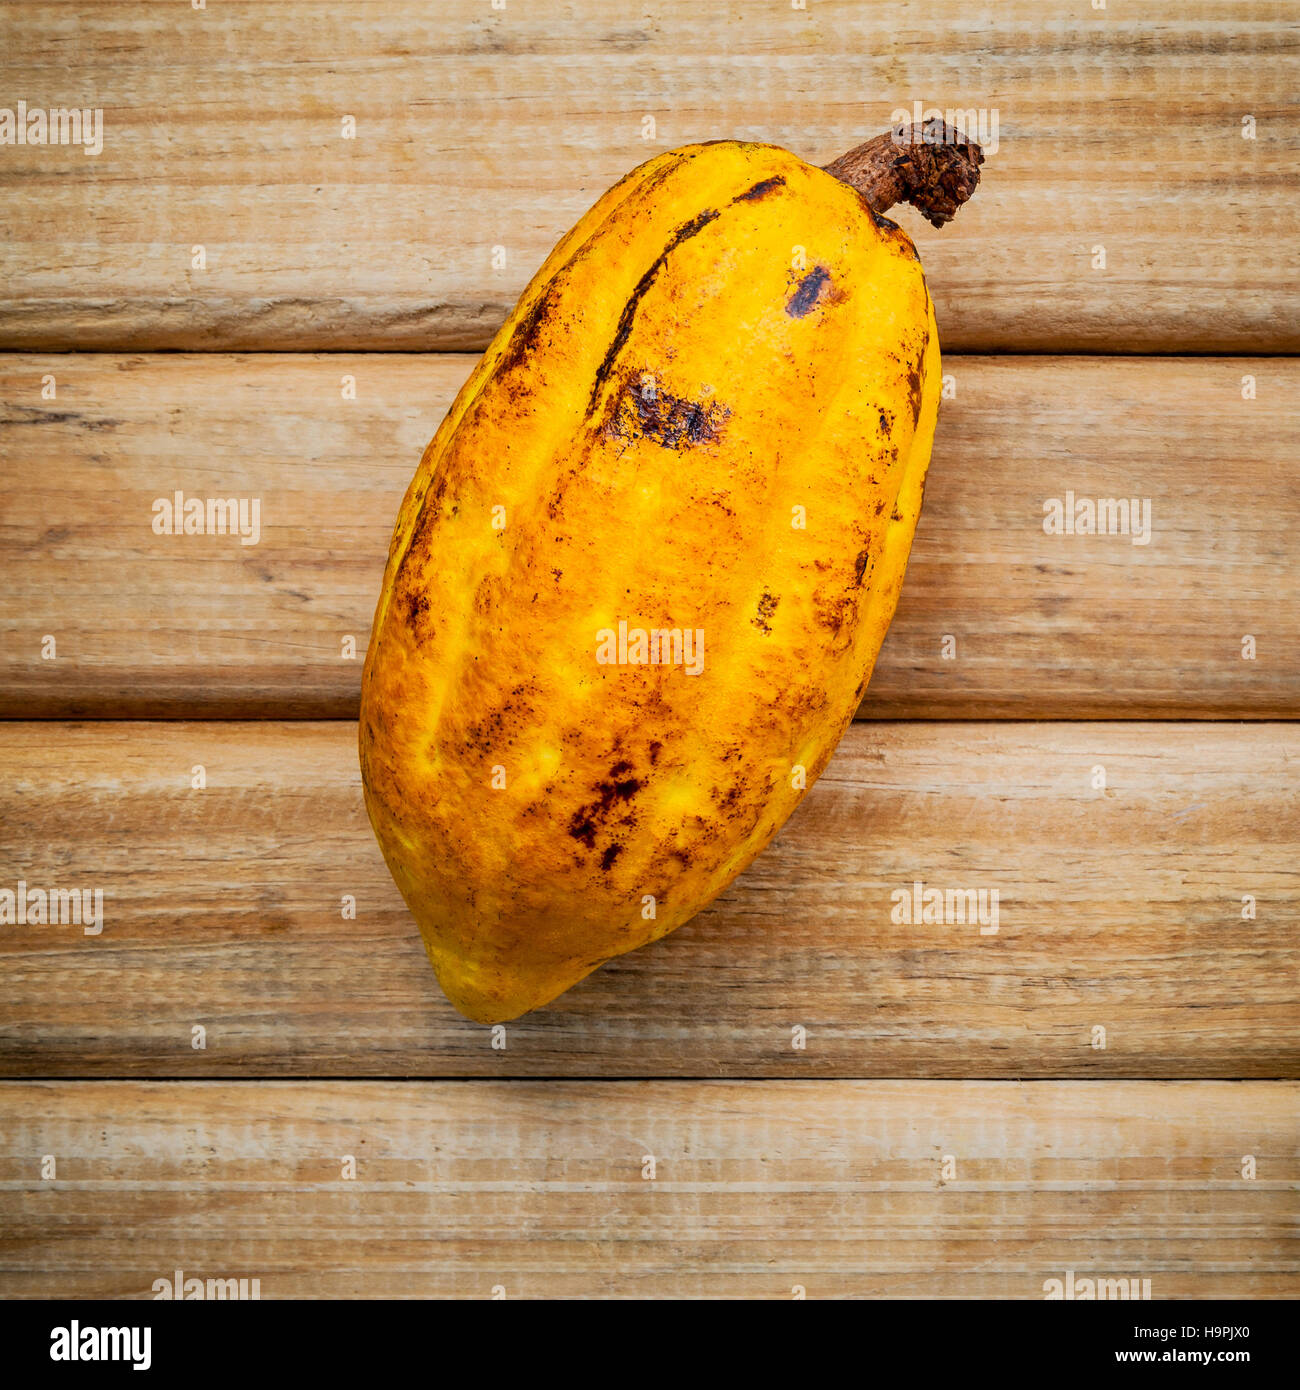 Ripe Indonesia's cocoa  setup on rustic wooden background. Stock Photo